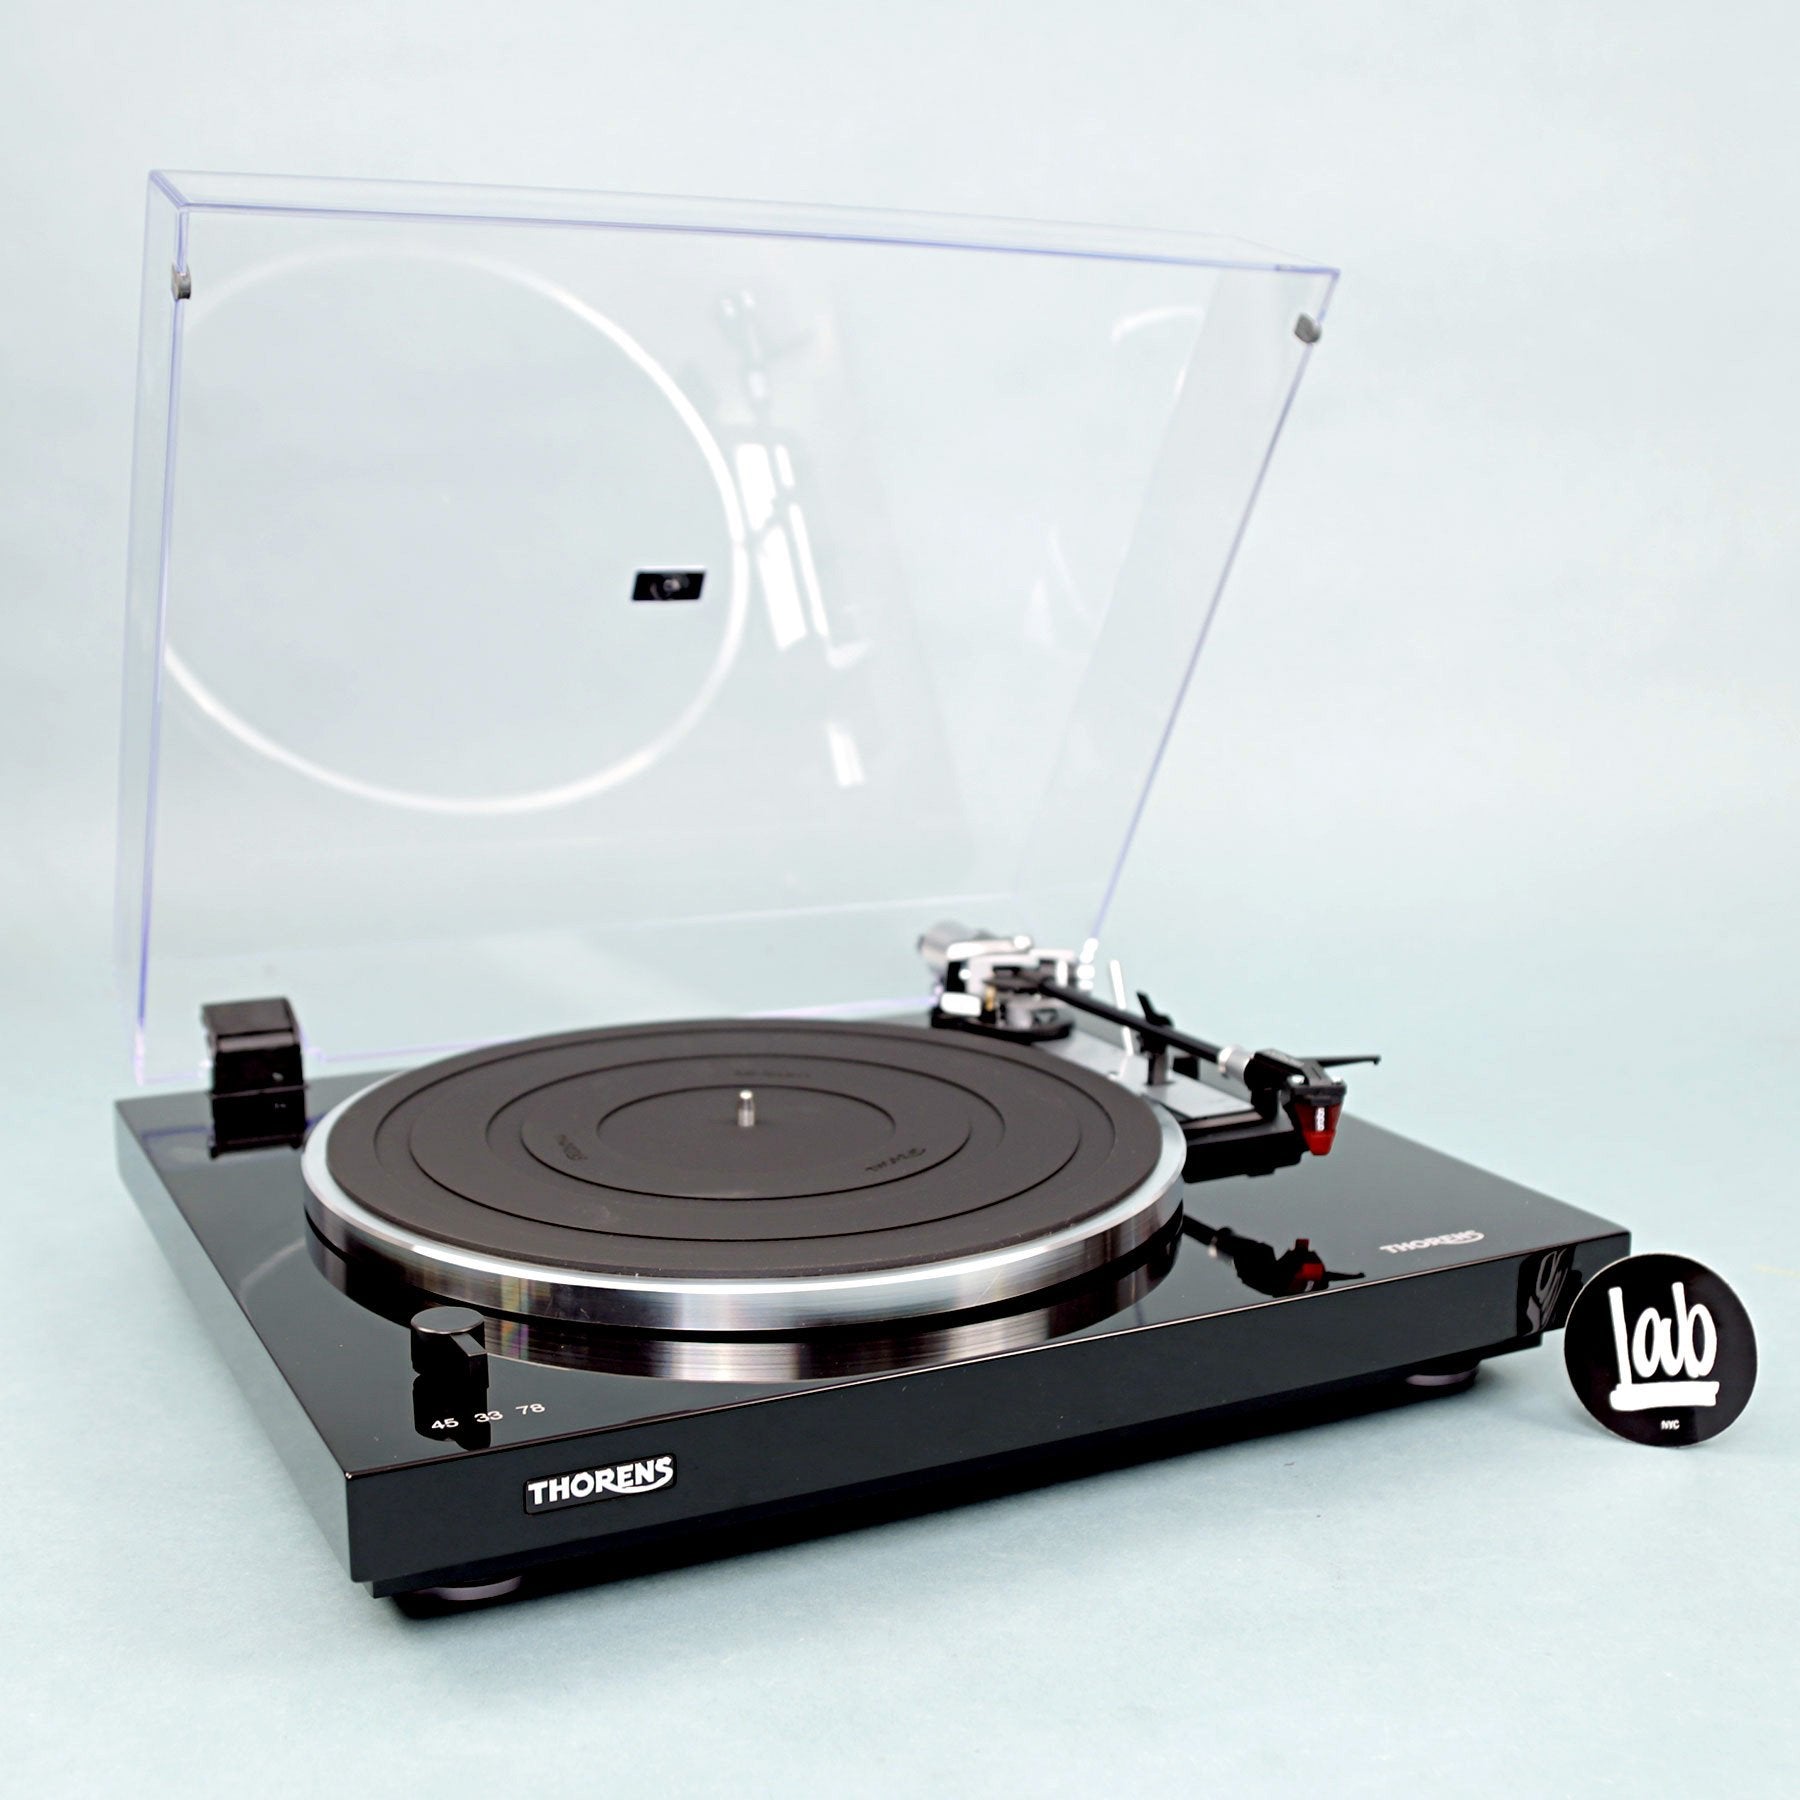 Thorens: TD 103A Fully Automatic Turntable - Black High Gloss + FREE Thorens Isolation Base